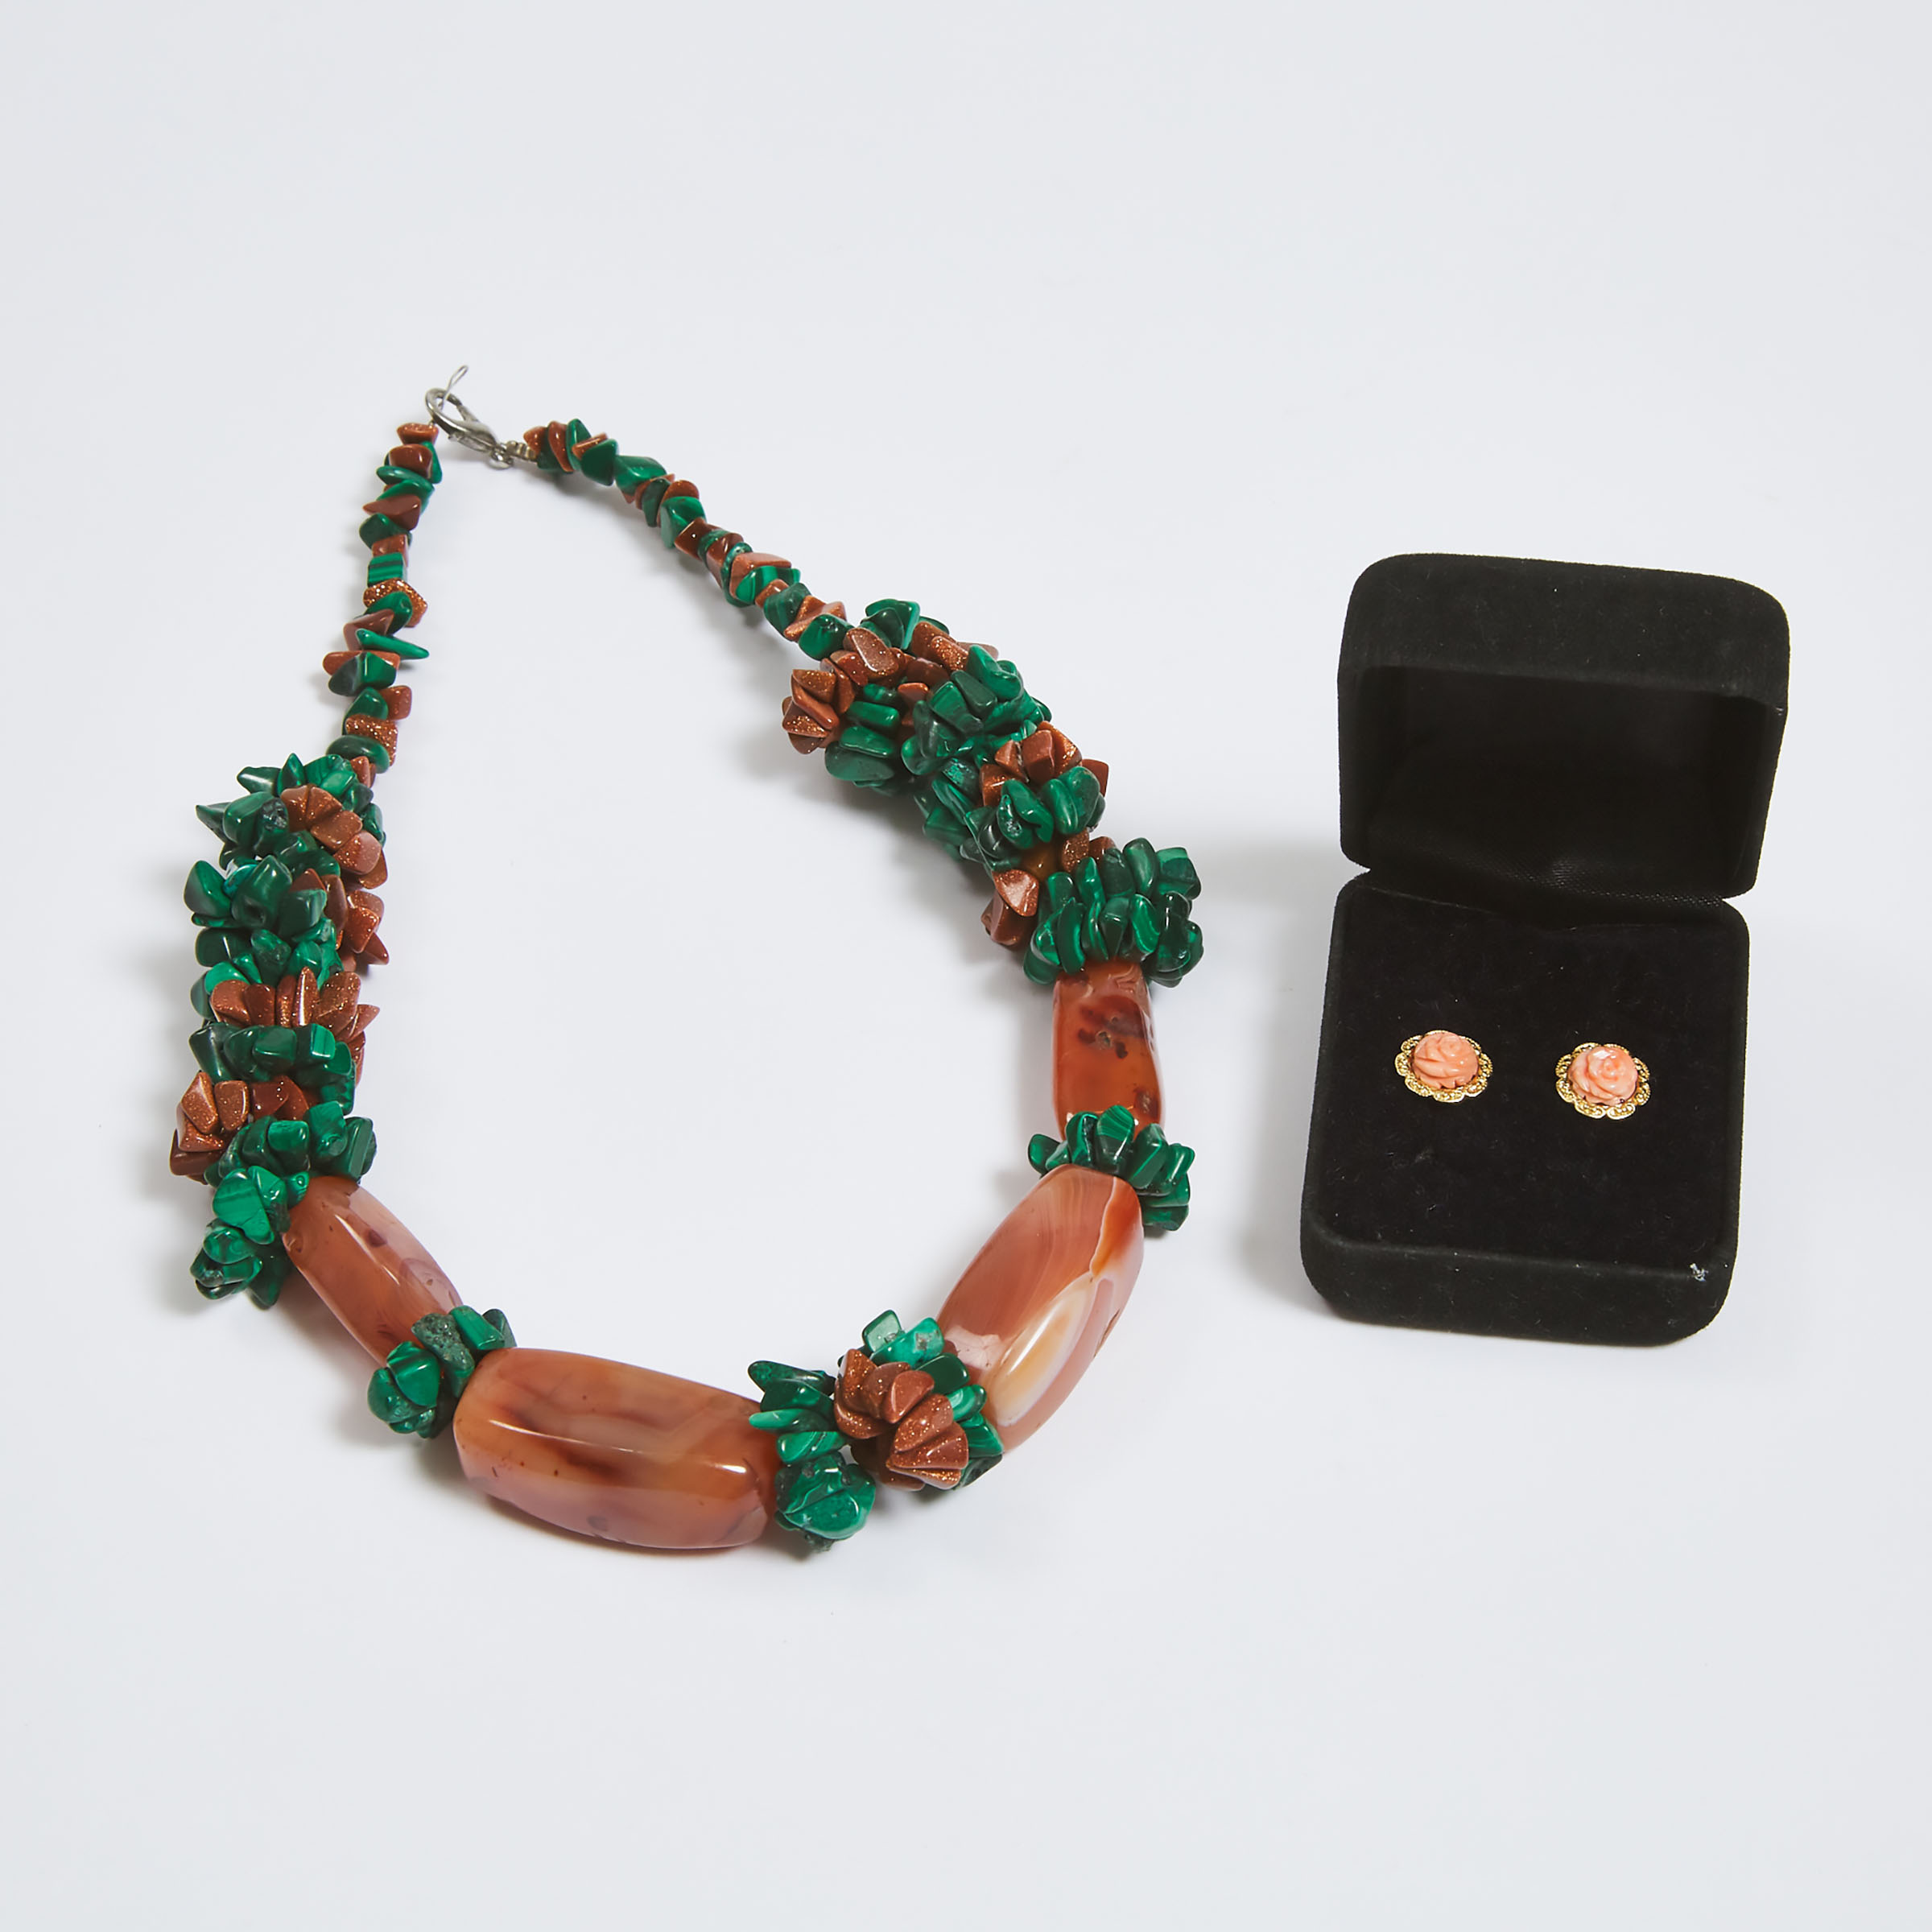 A Pair of Coral and Gold Earrings, Together With a Beaded Agate, Malachite, and Aventurine Necklace 